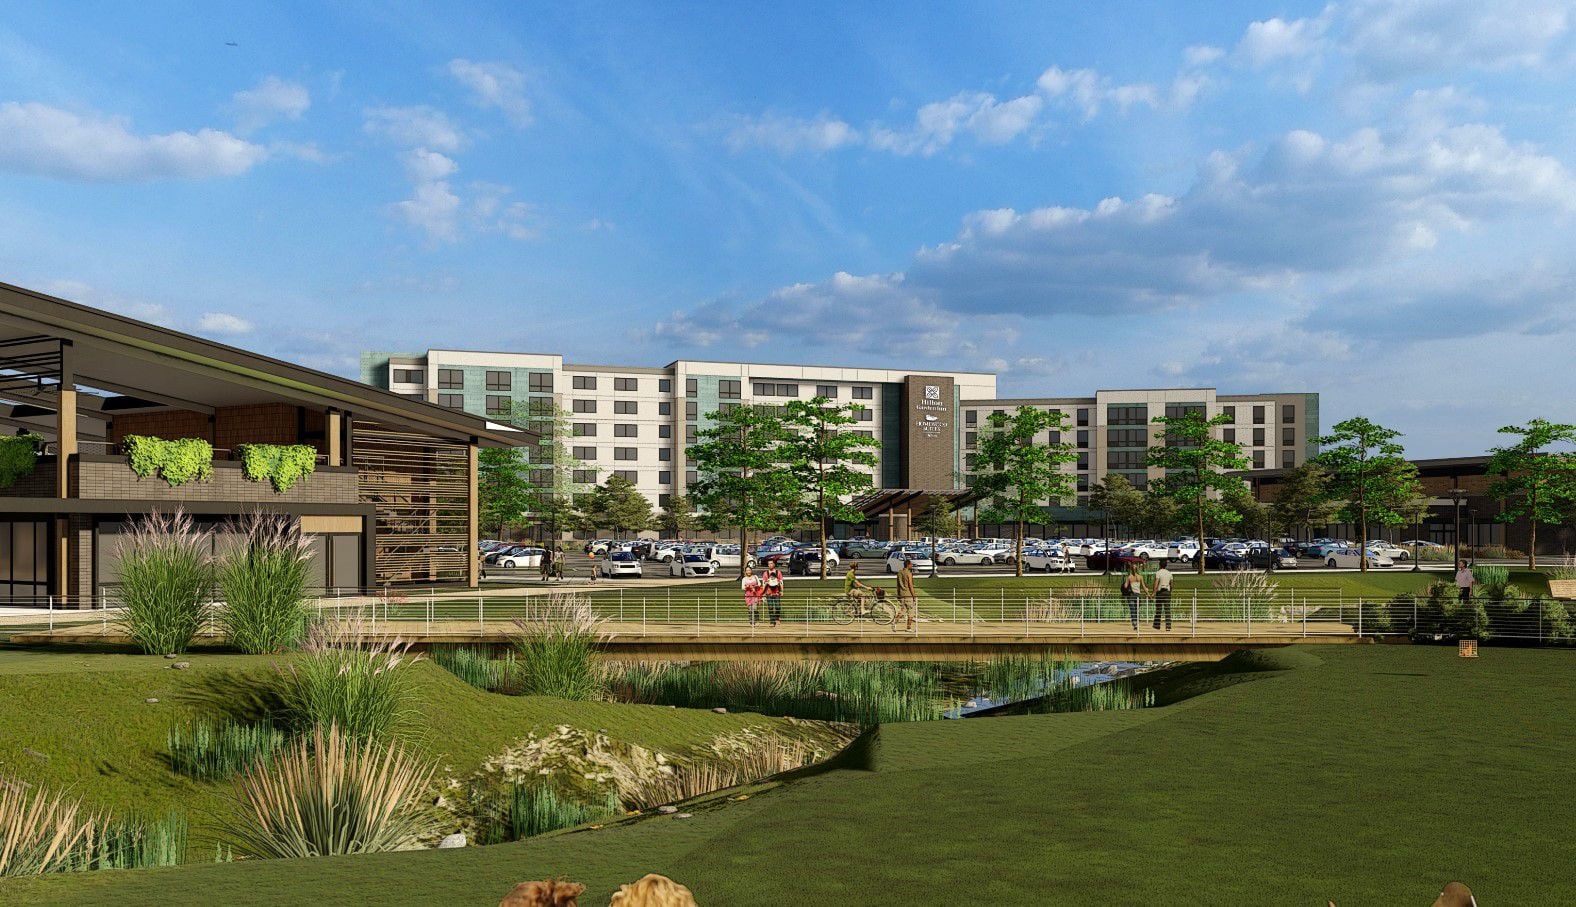 The new phase of EpicCentral's construction includes two new hotels.